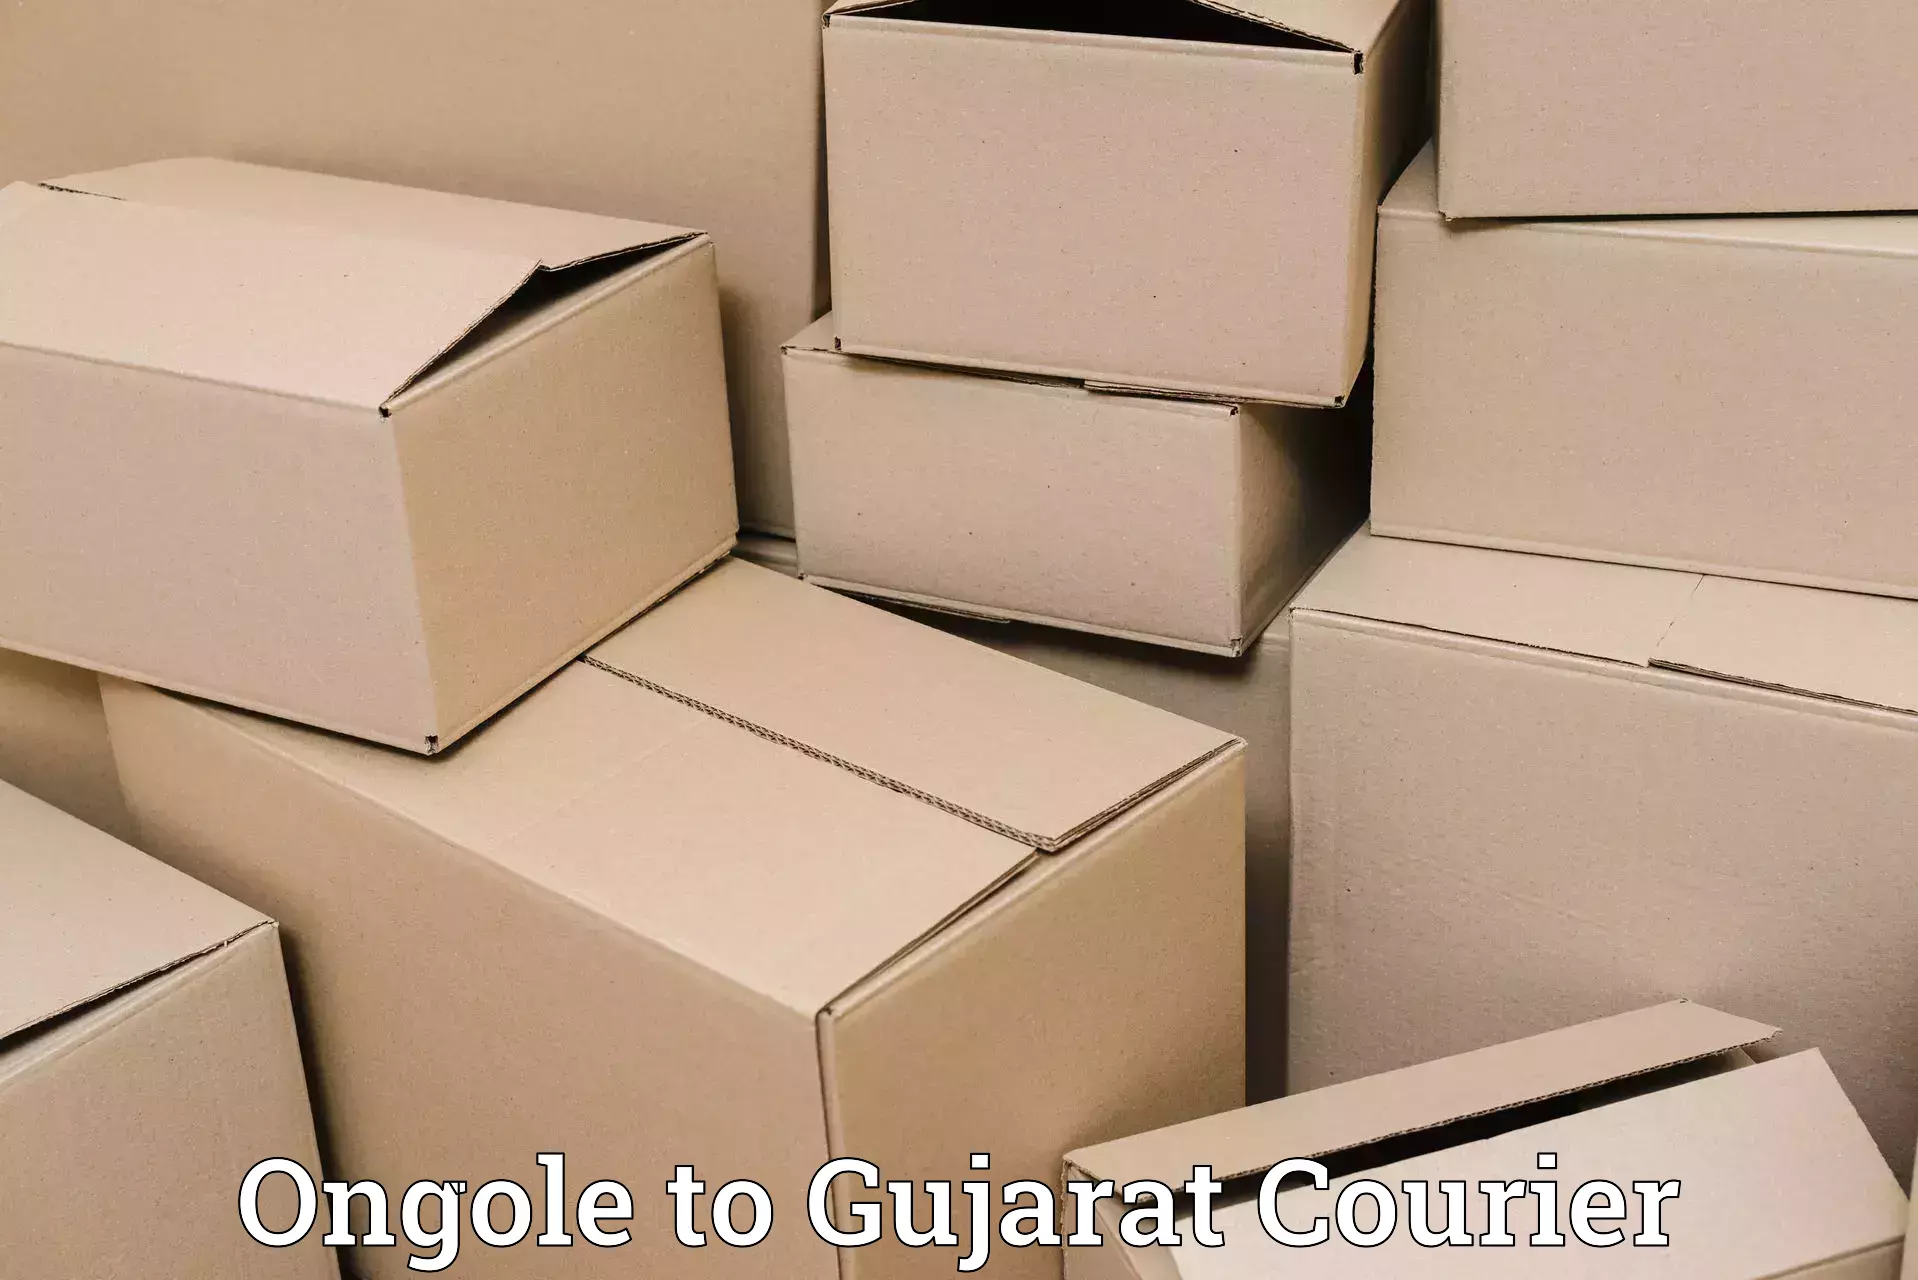 High-capacity shipping options Ongole to Songadh